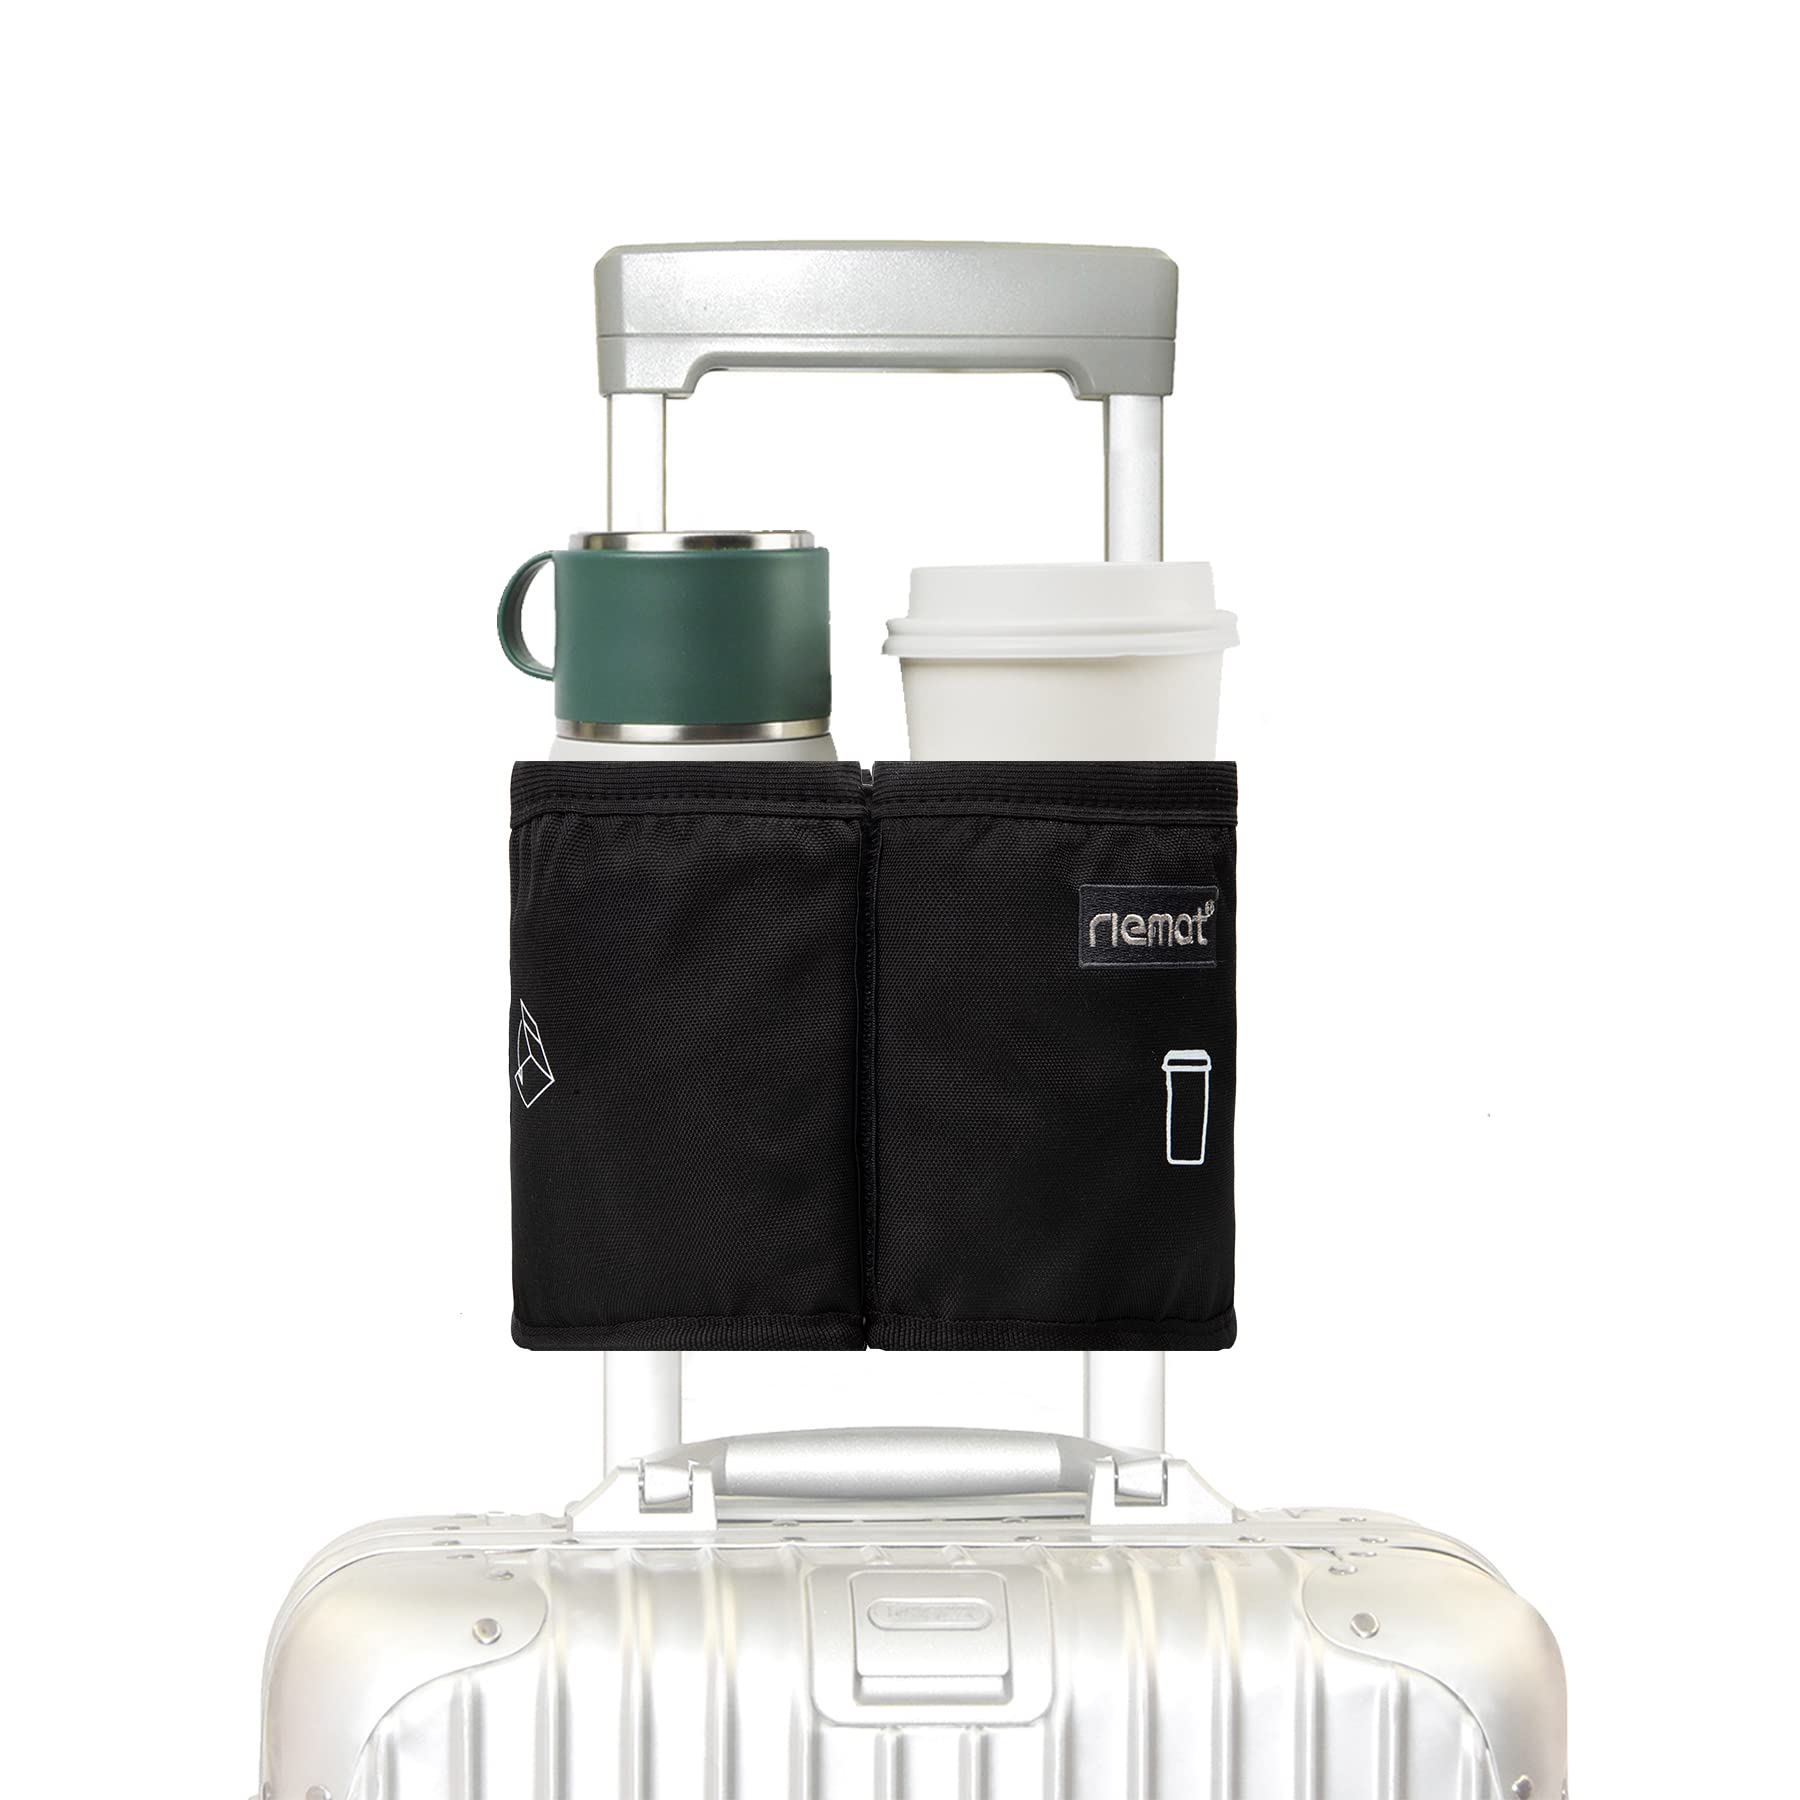 Luggage Travel Cup Holder